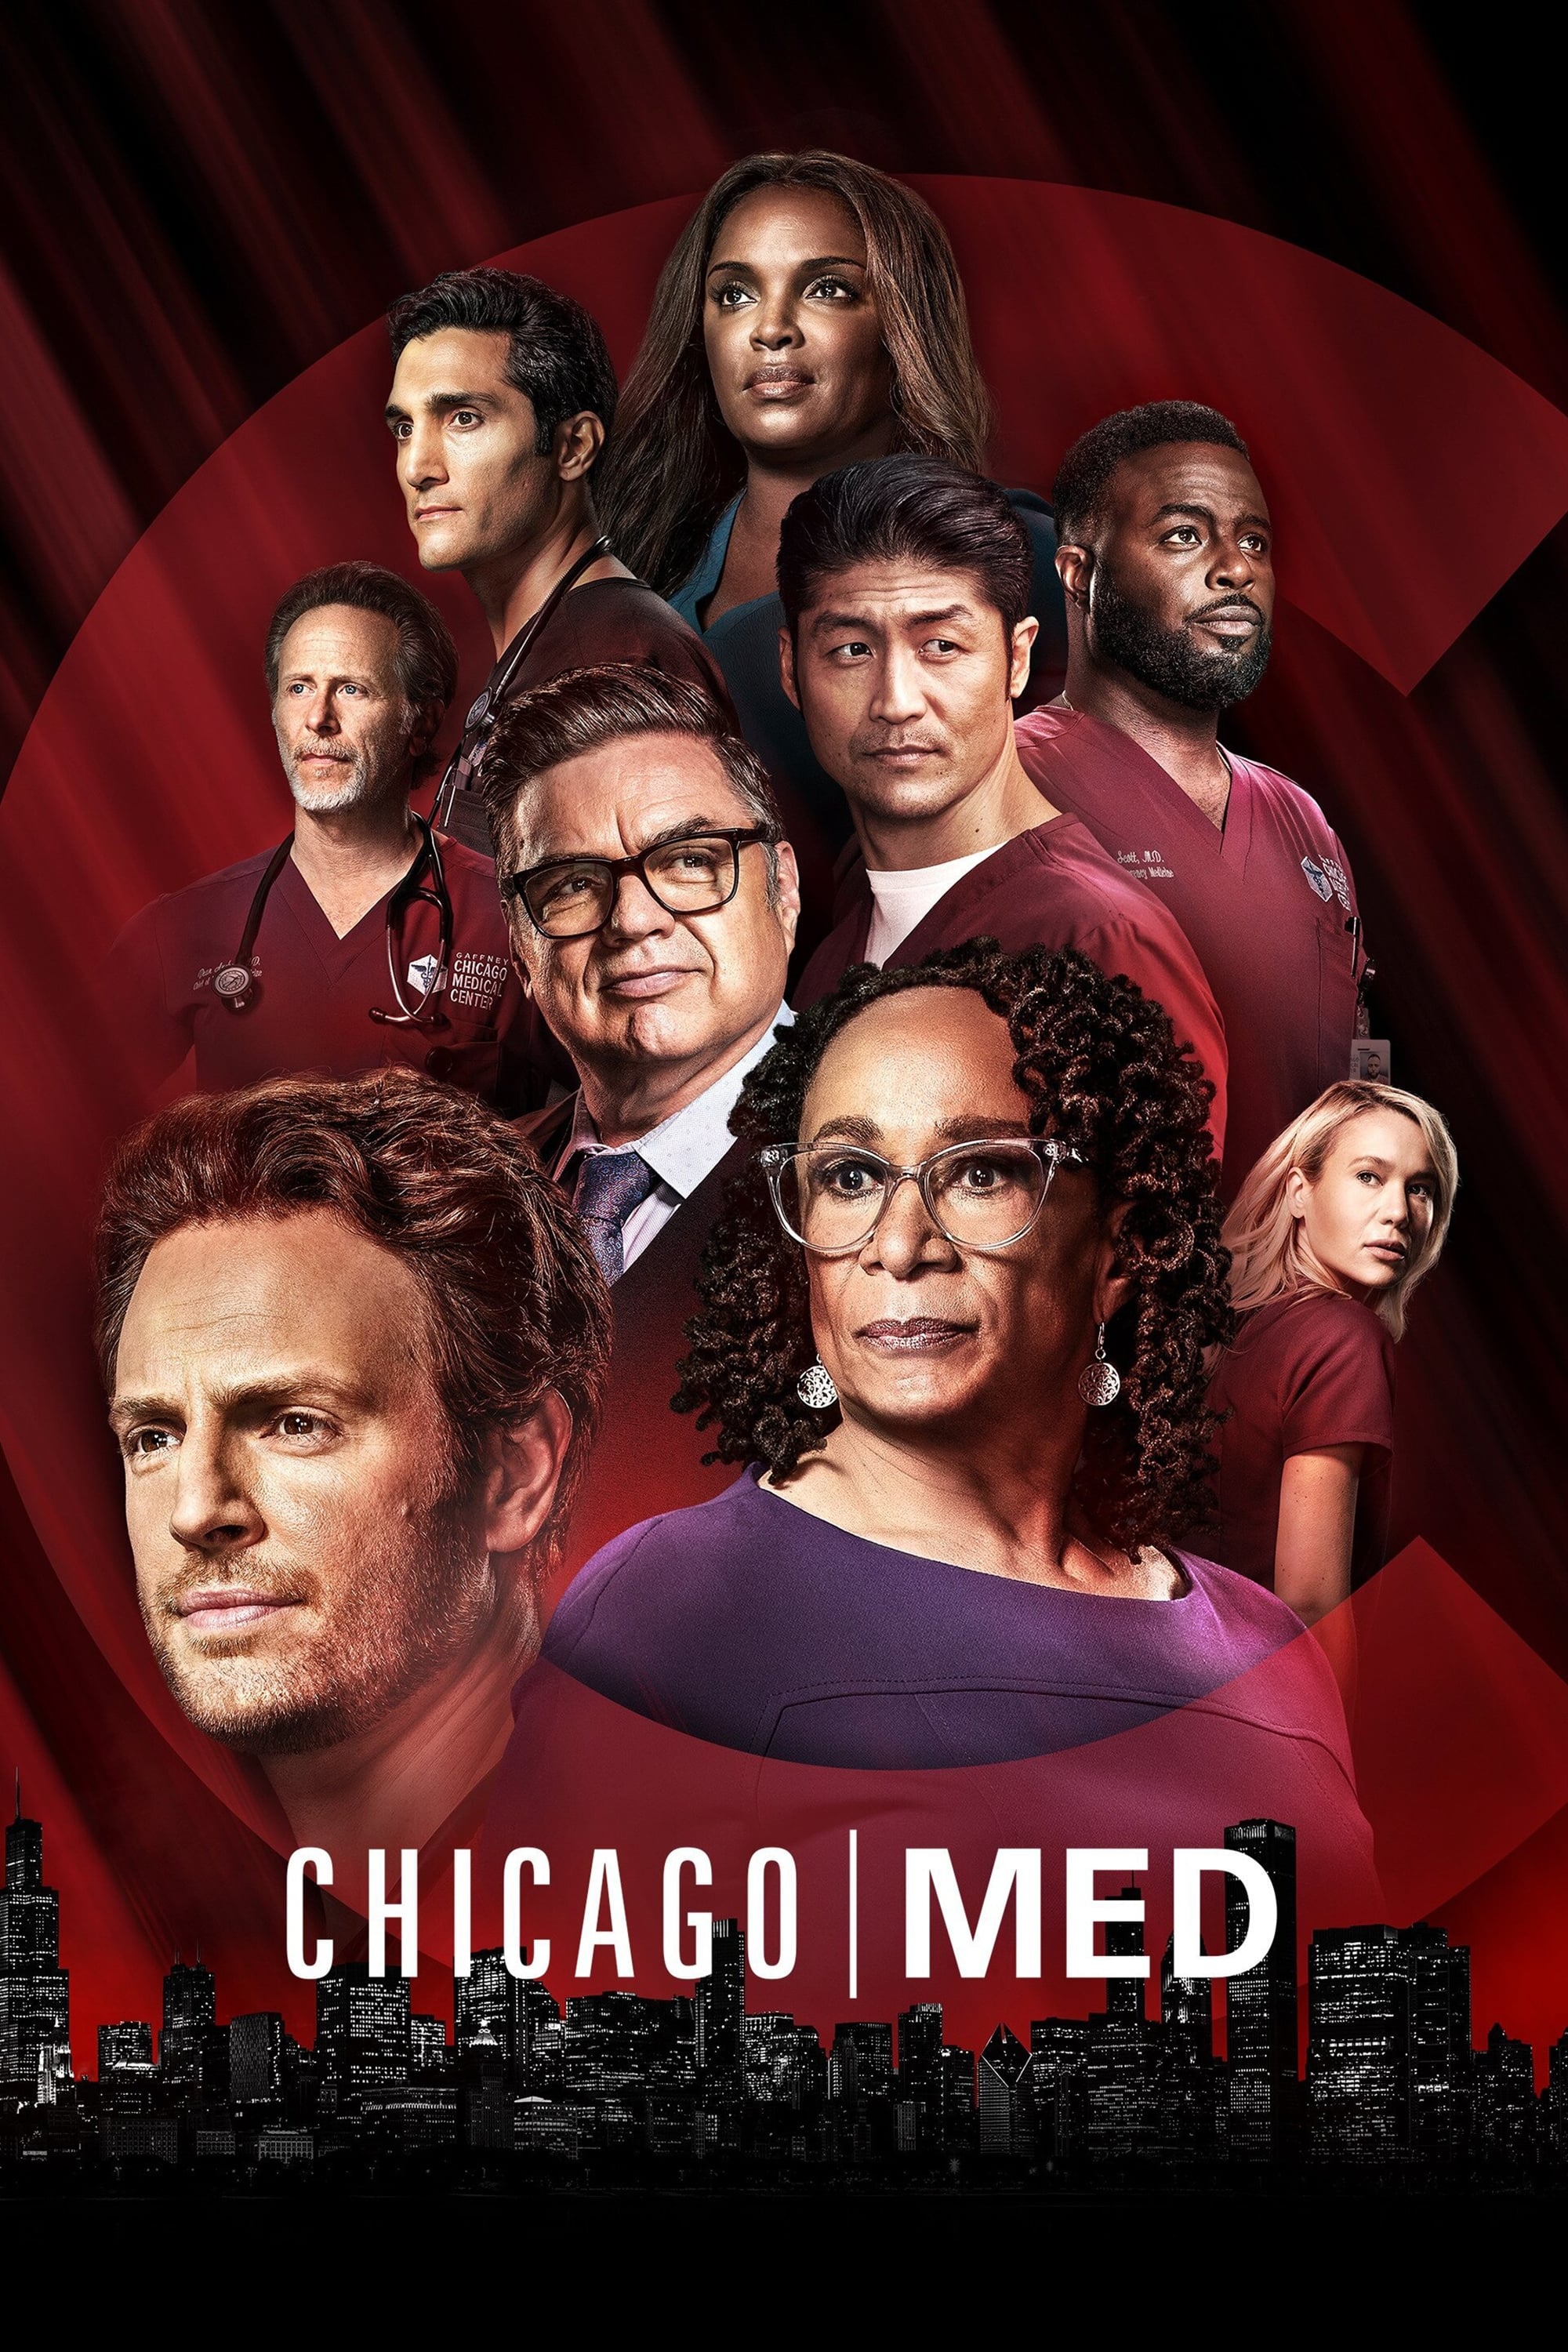 Chicago Med TV Shows About Medical Drama